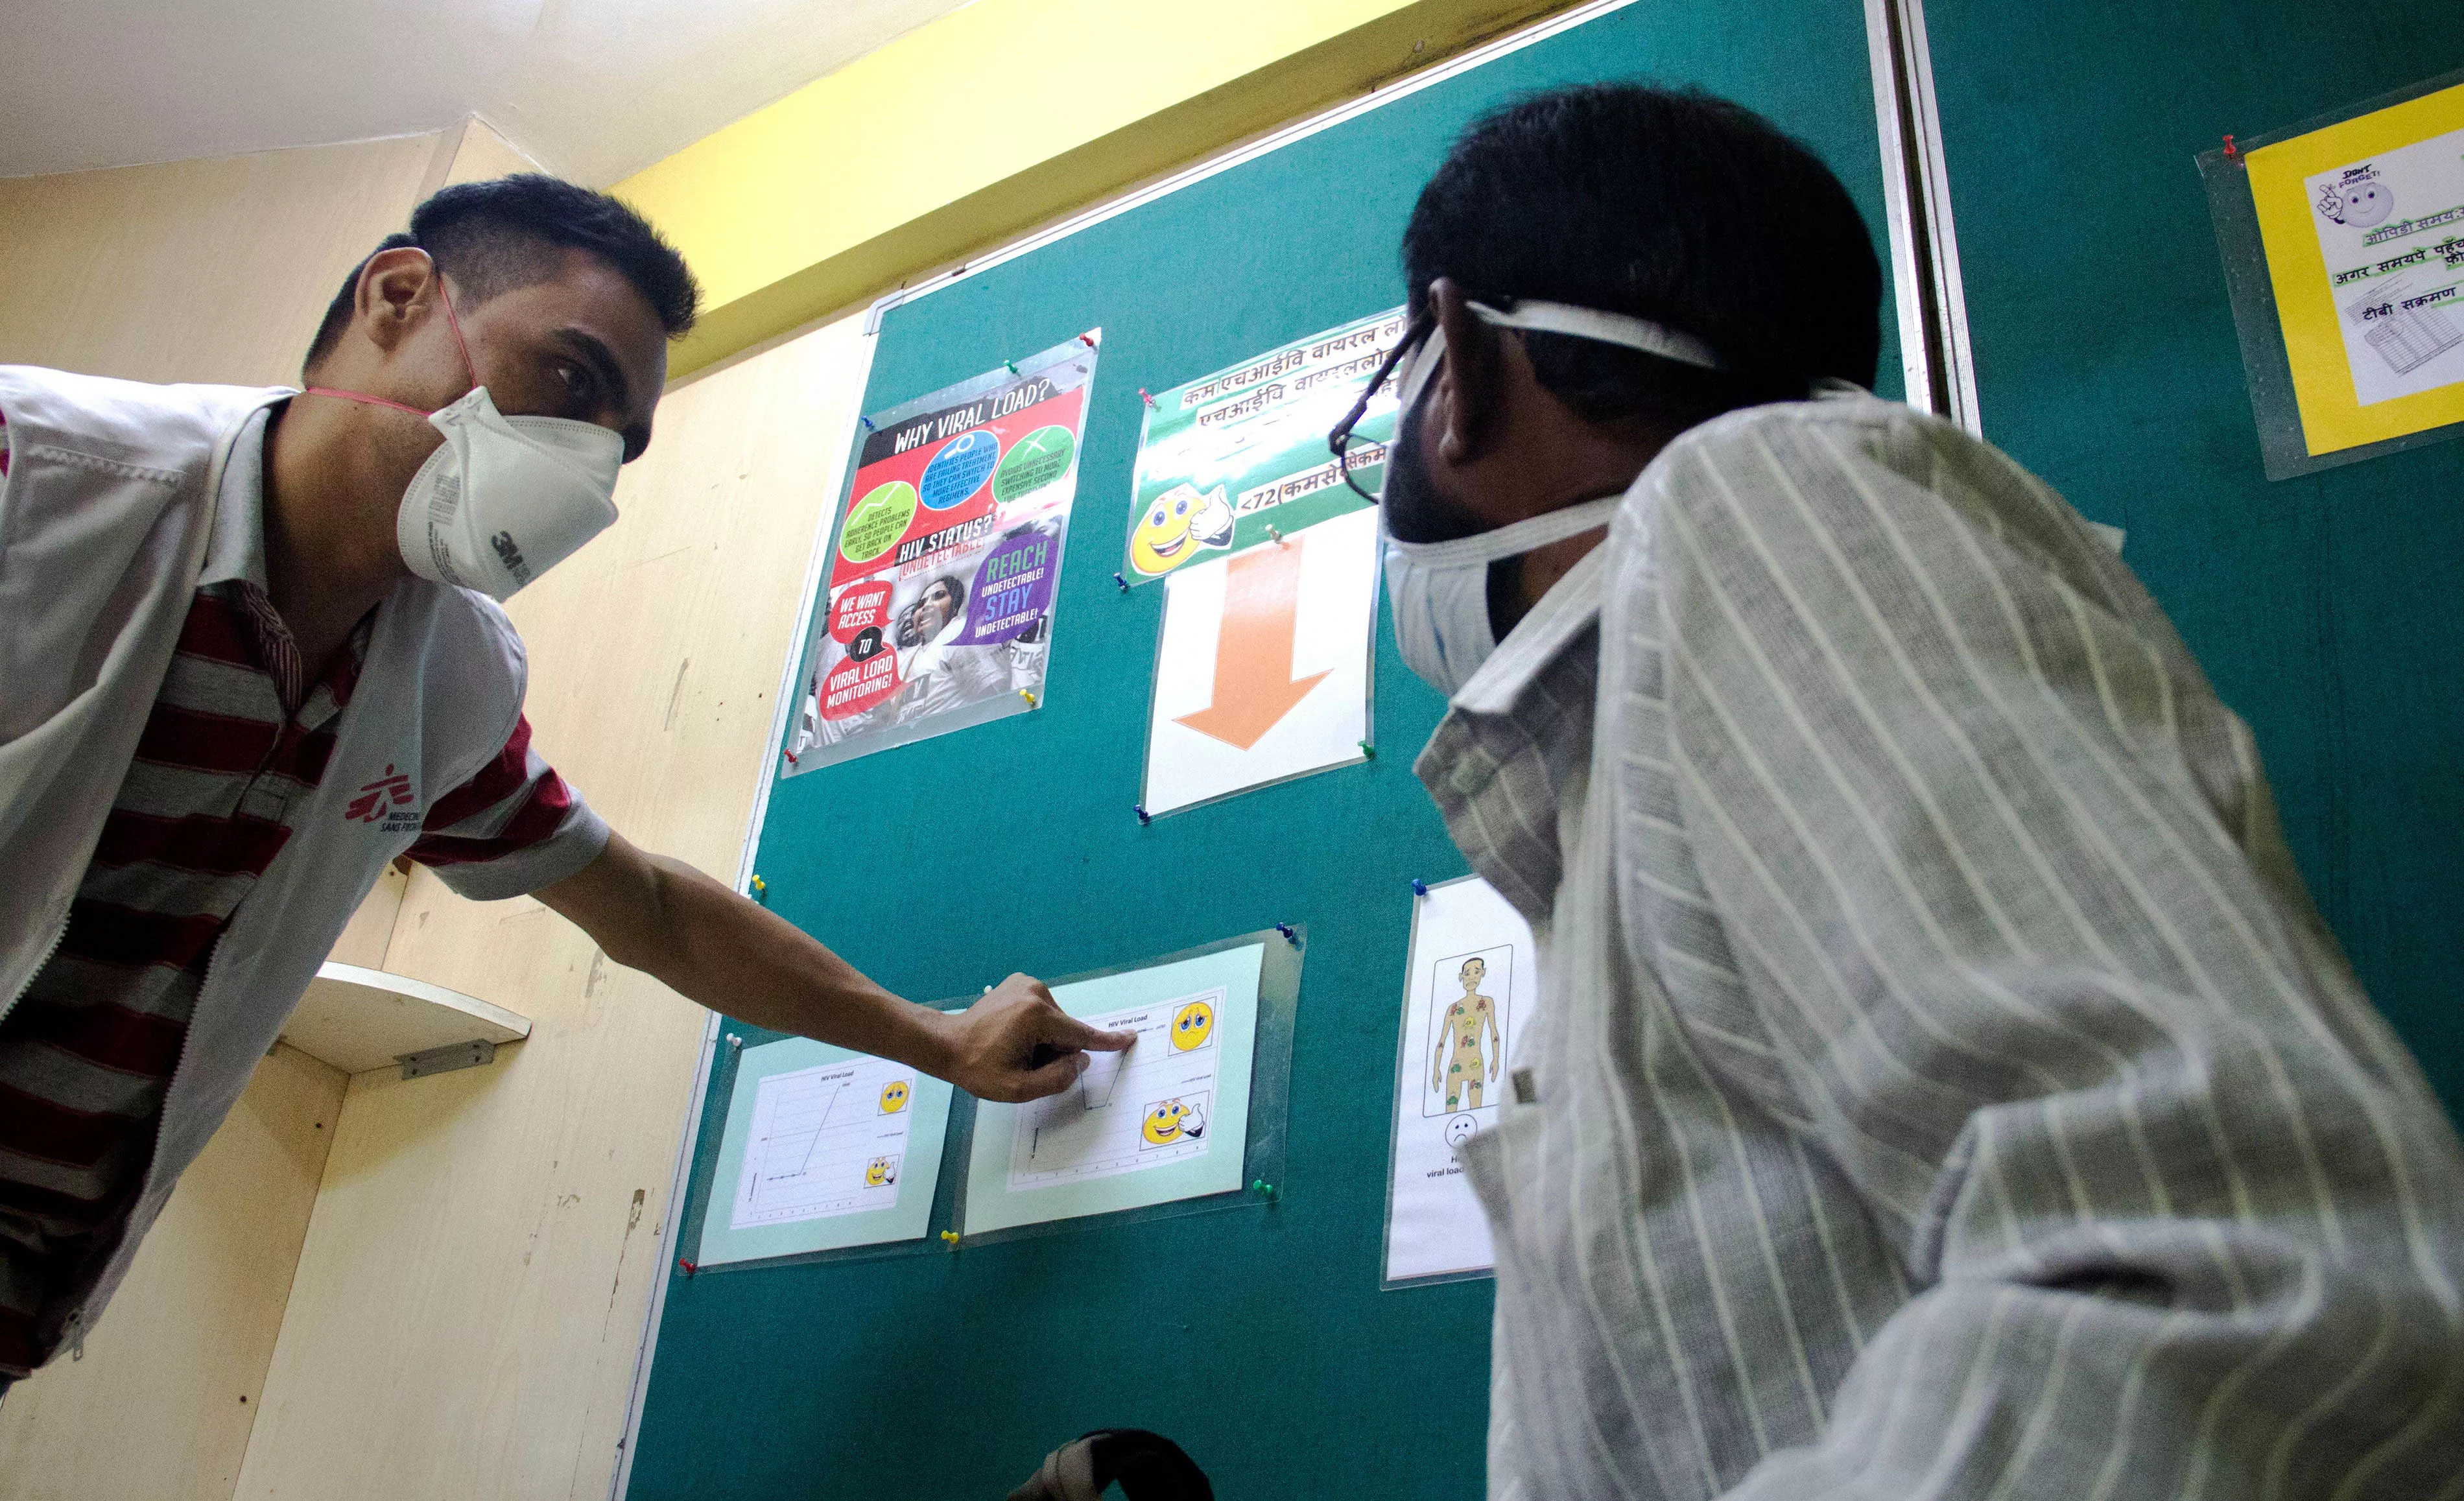 A Peer Educator in MSF Mumbai clinic conducting an educational session for a patient living with HIV, on 3rd line ART